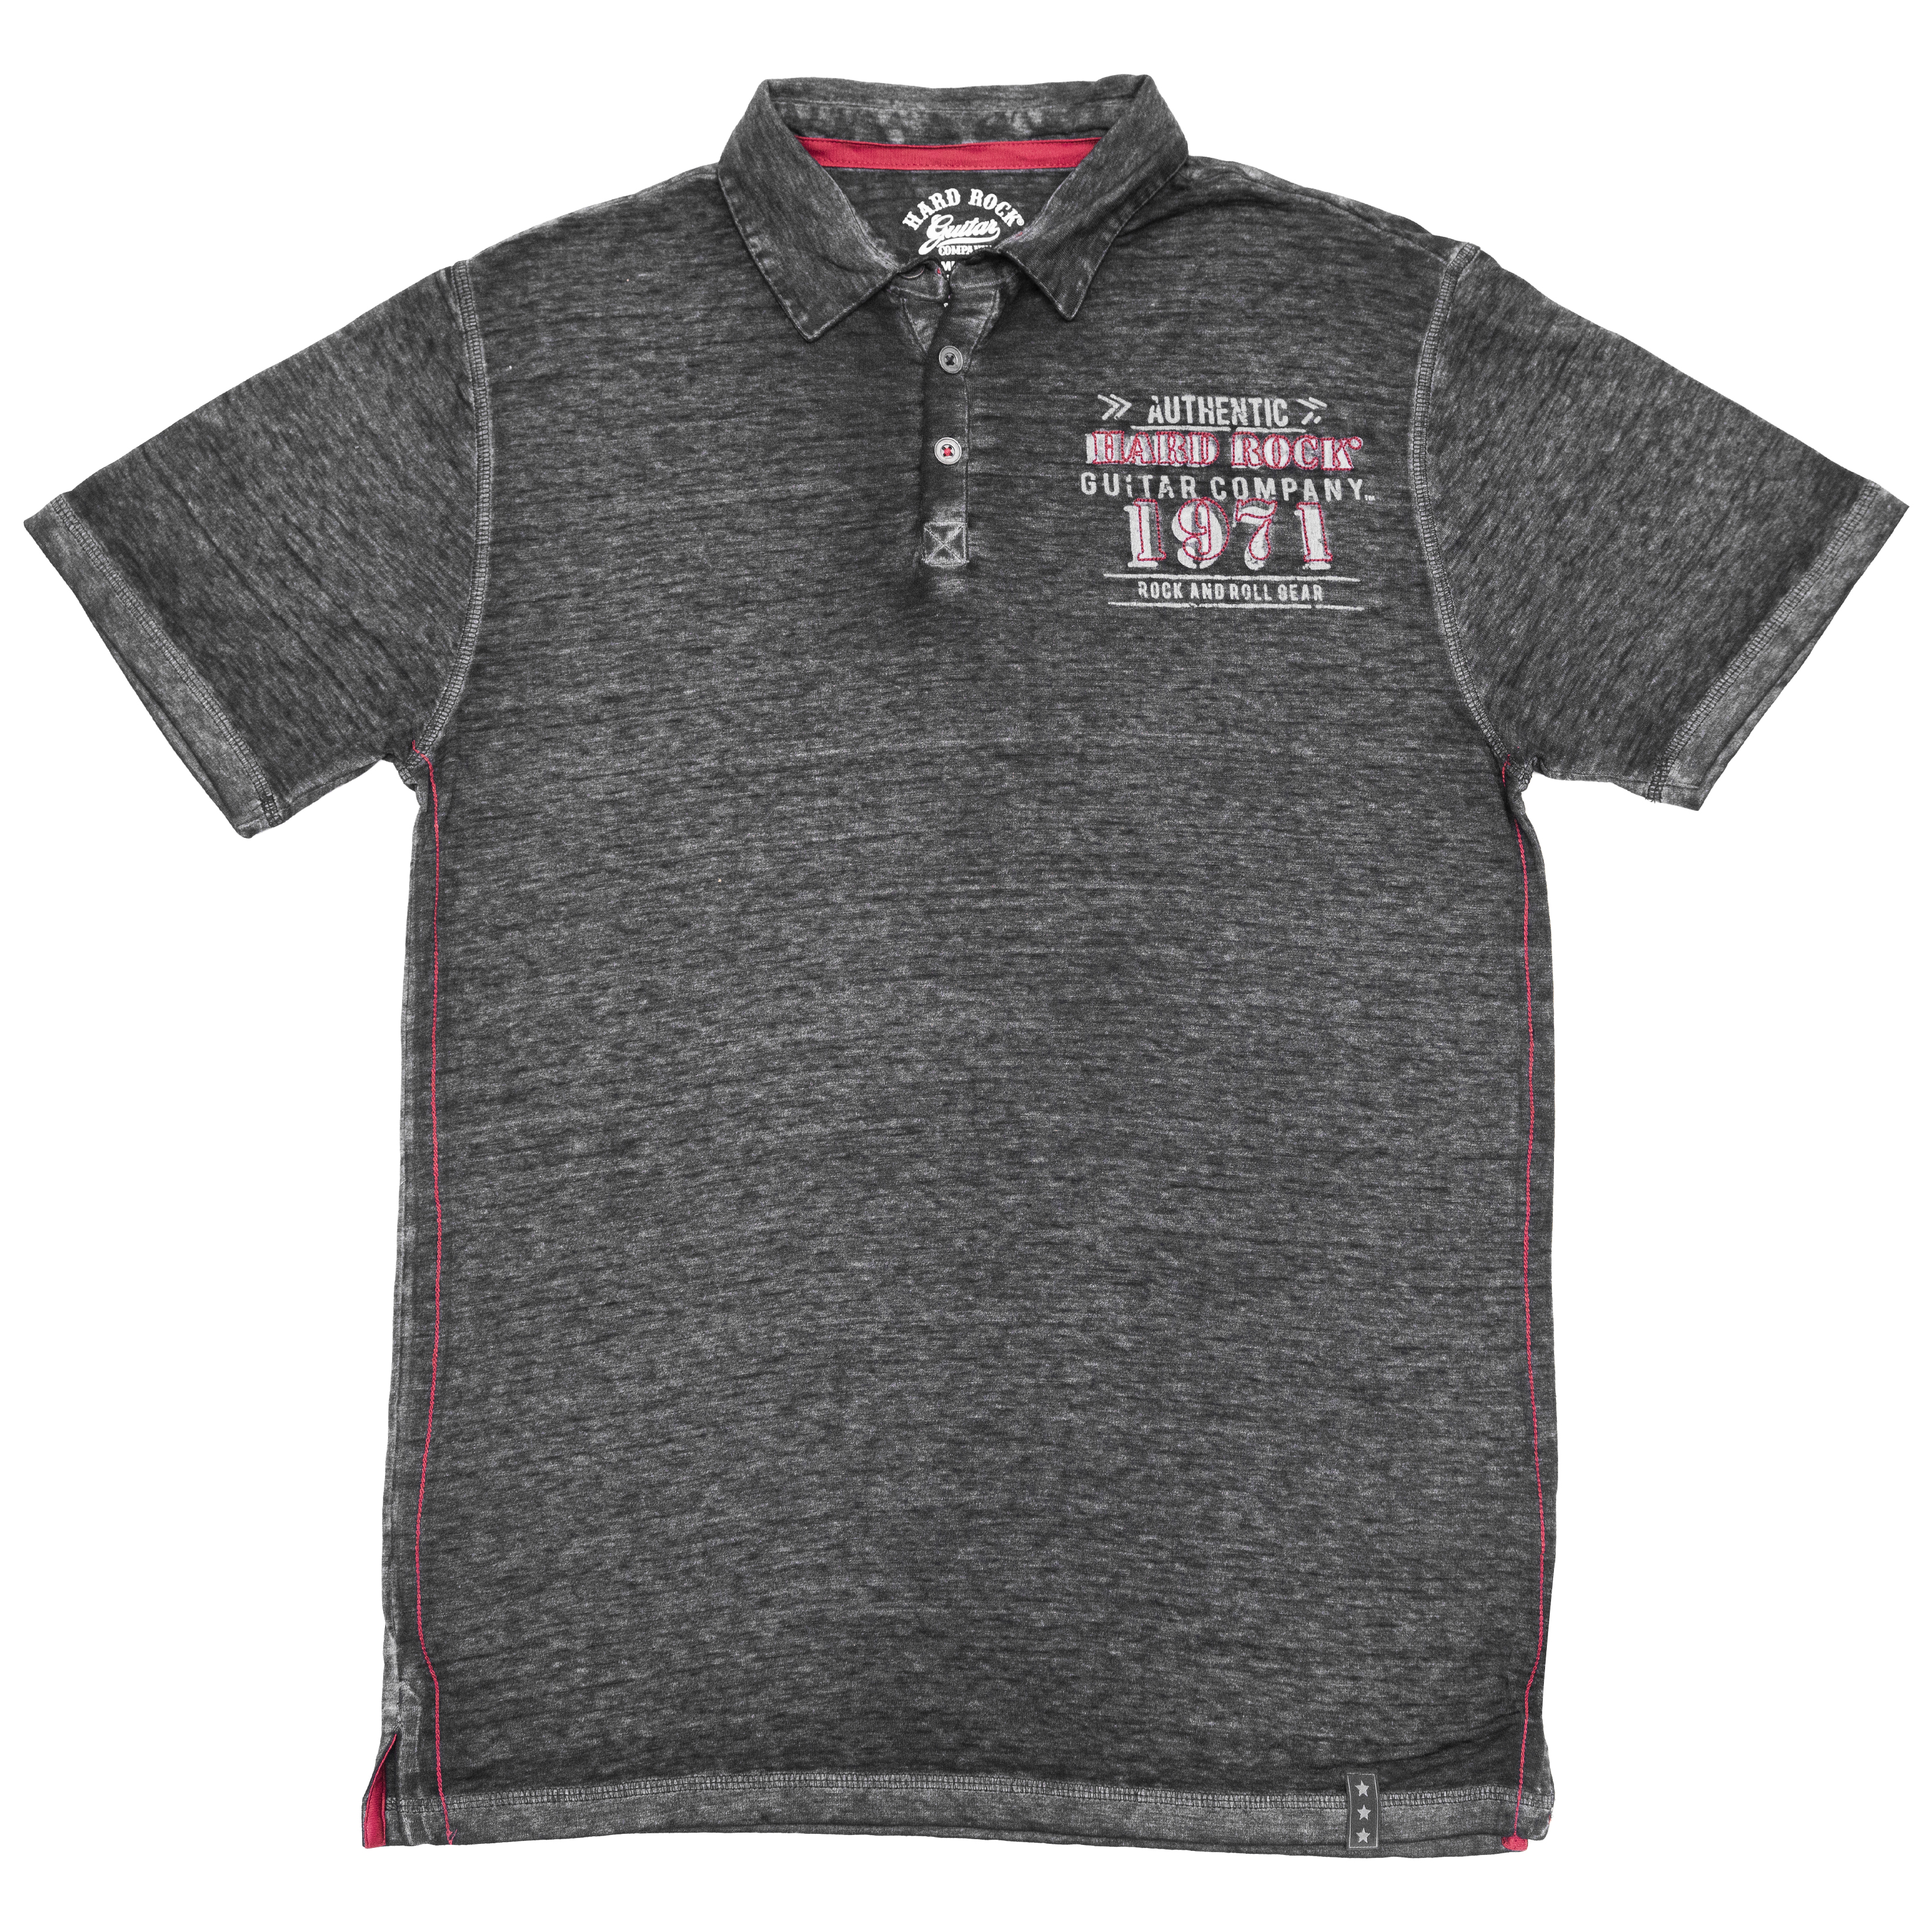 Hard Rock Guitar Company Polo in Grey with Red Stitching image number 6